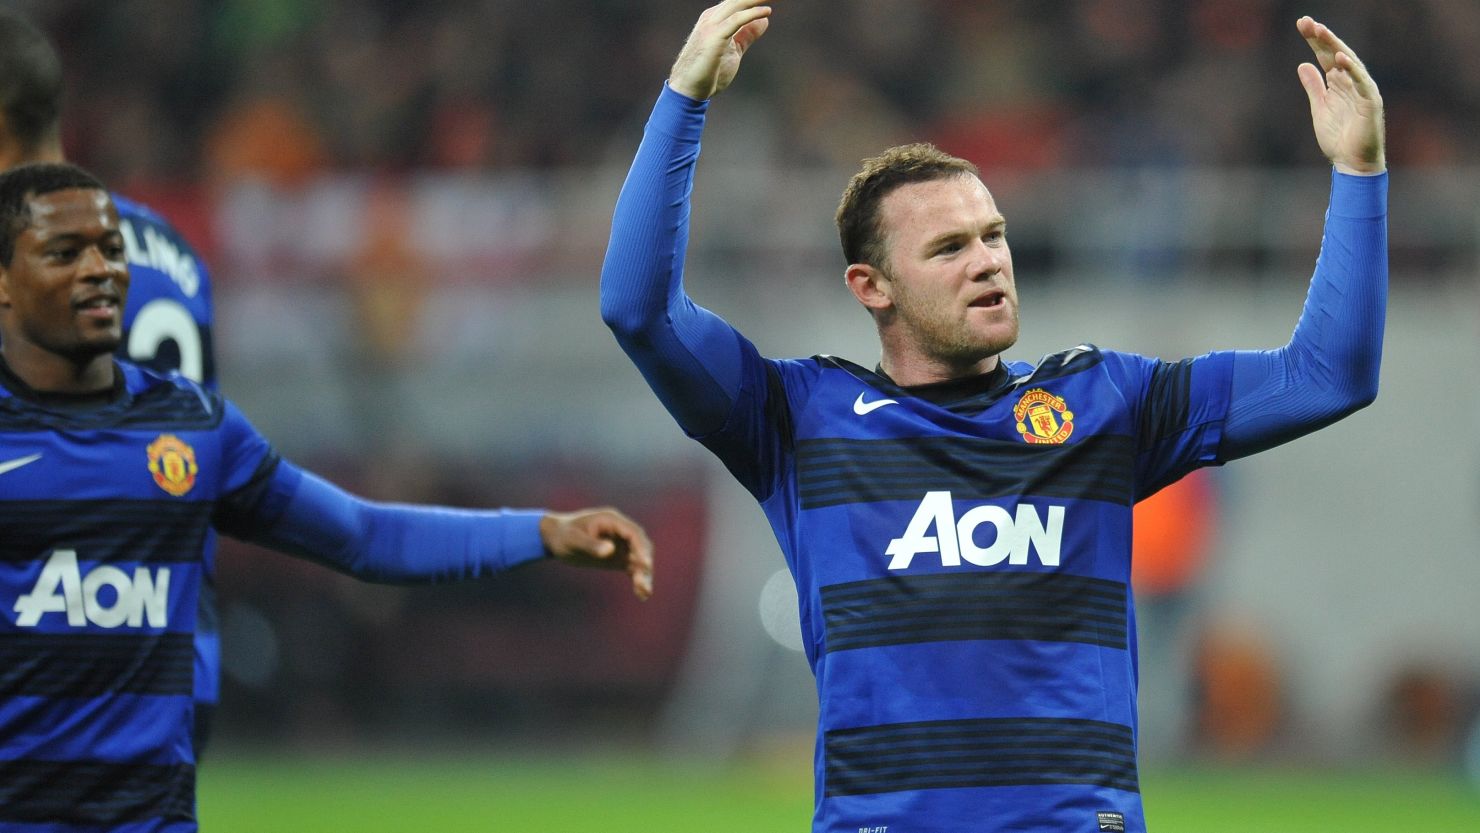 Wayne Rooney scored two penalties to secure Manchester United's first win in the UEFA Champions League this season